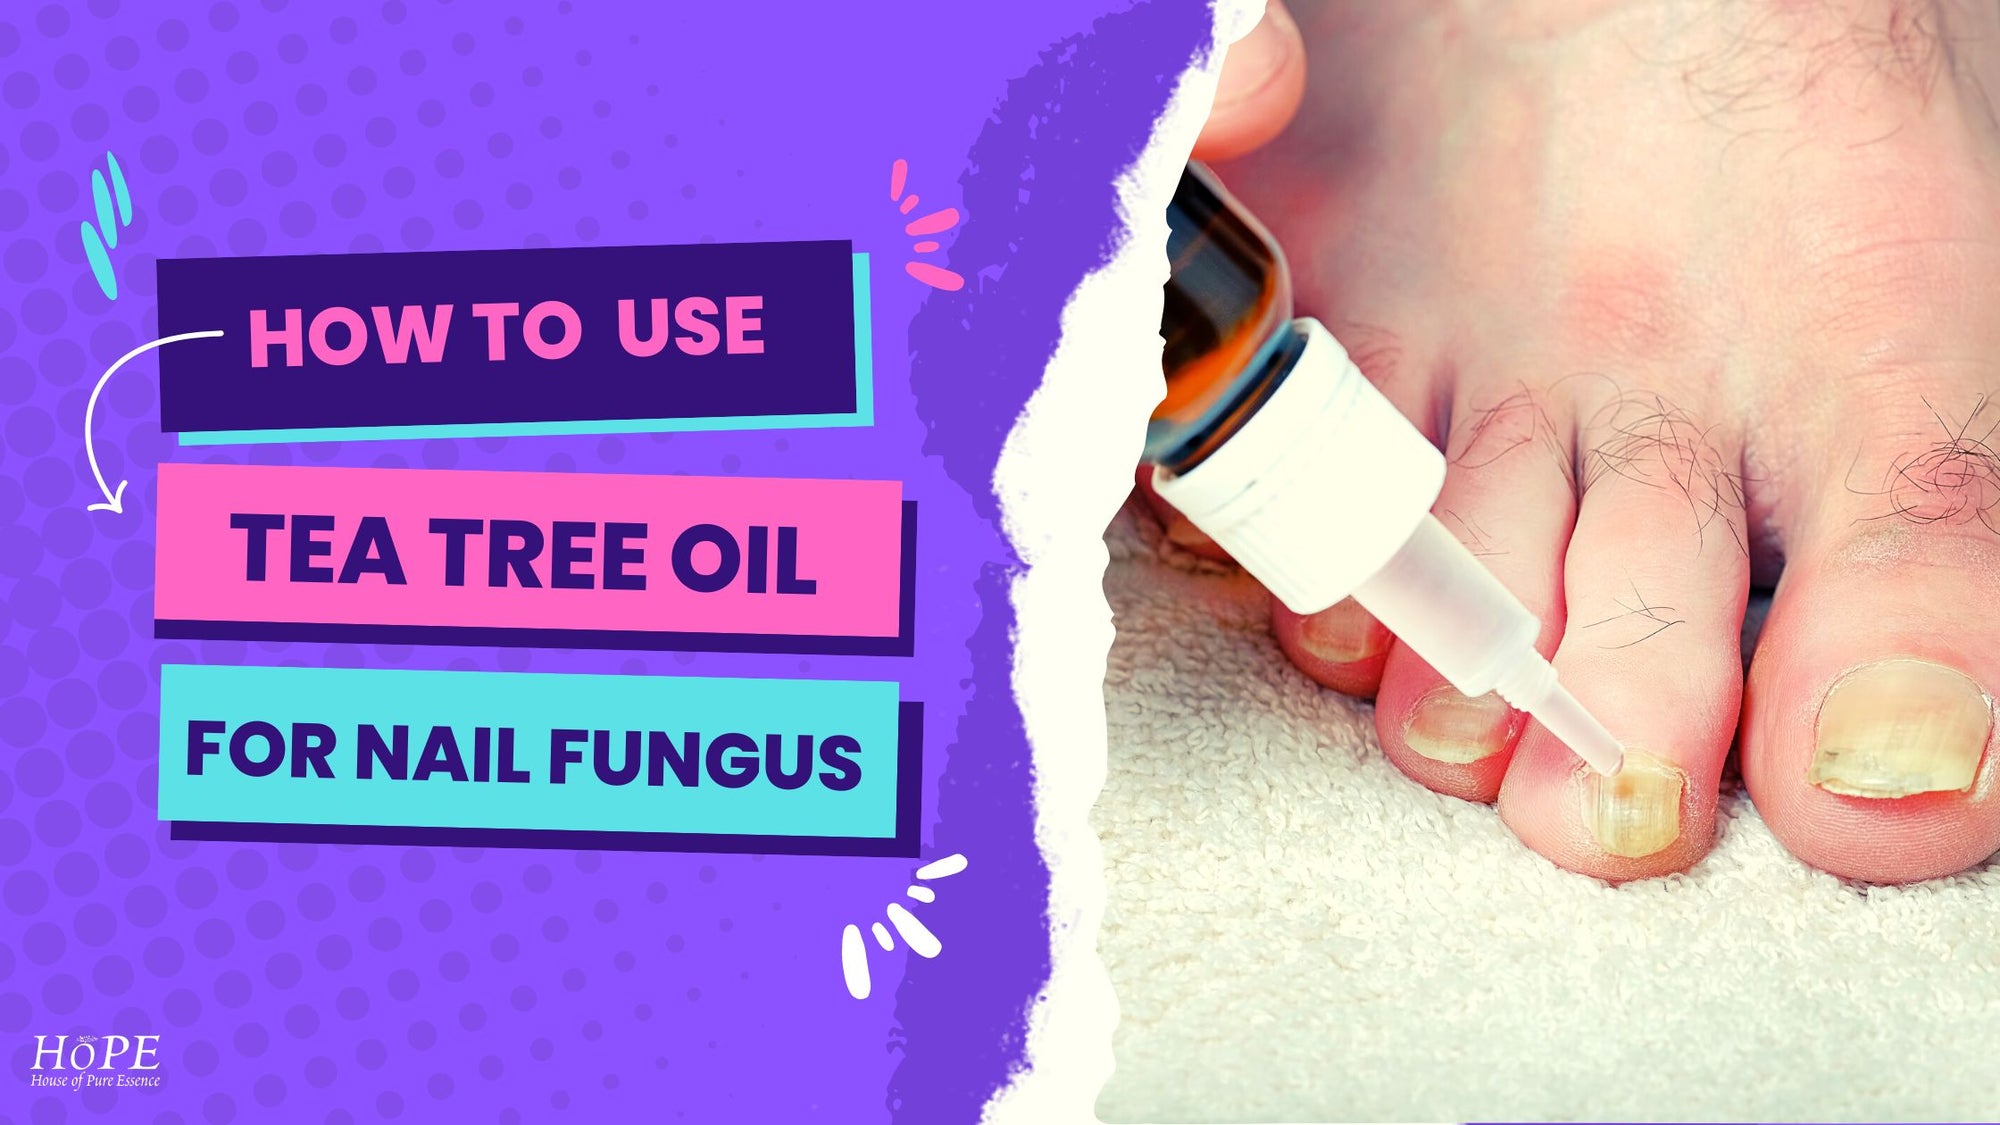 How to Use Tea Tree Oil for Nail Fungus?